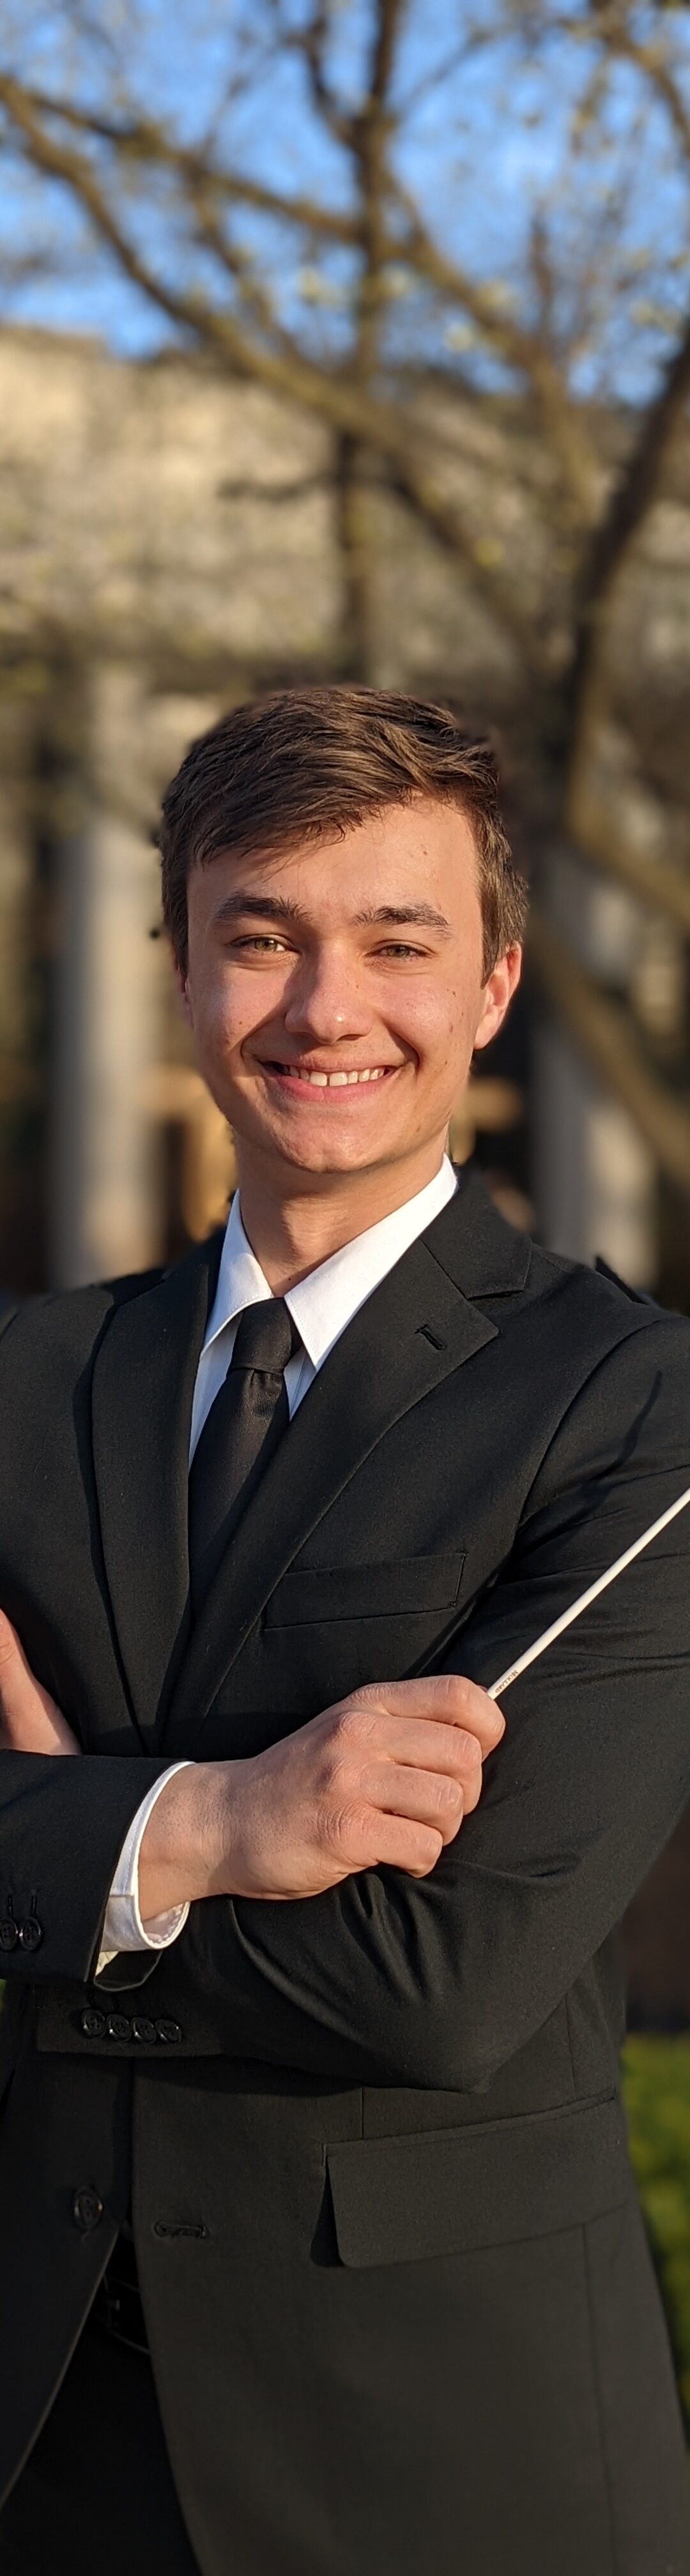 TRISTAN DONICA AWARDED 2023 PHILIP H. INMAN EXCELLENCE IN CHORAL CONDUCTING ARTS SCHOLARSHIP